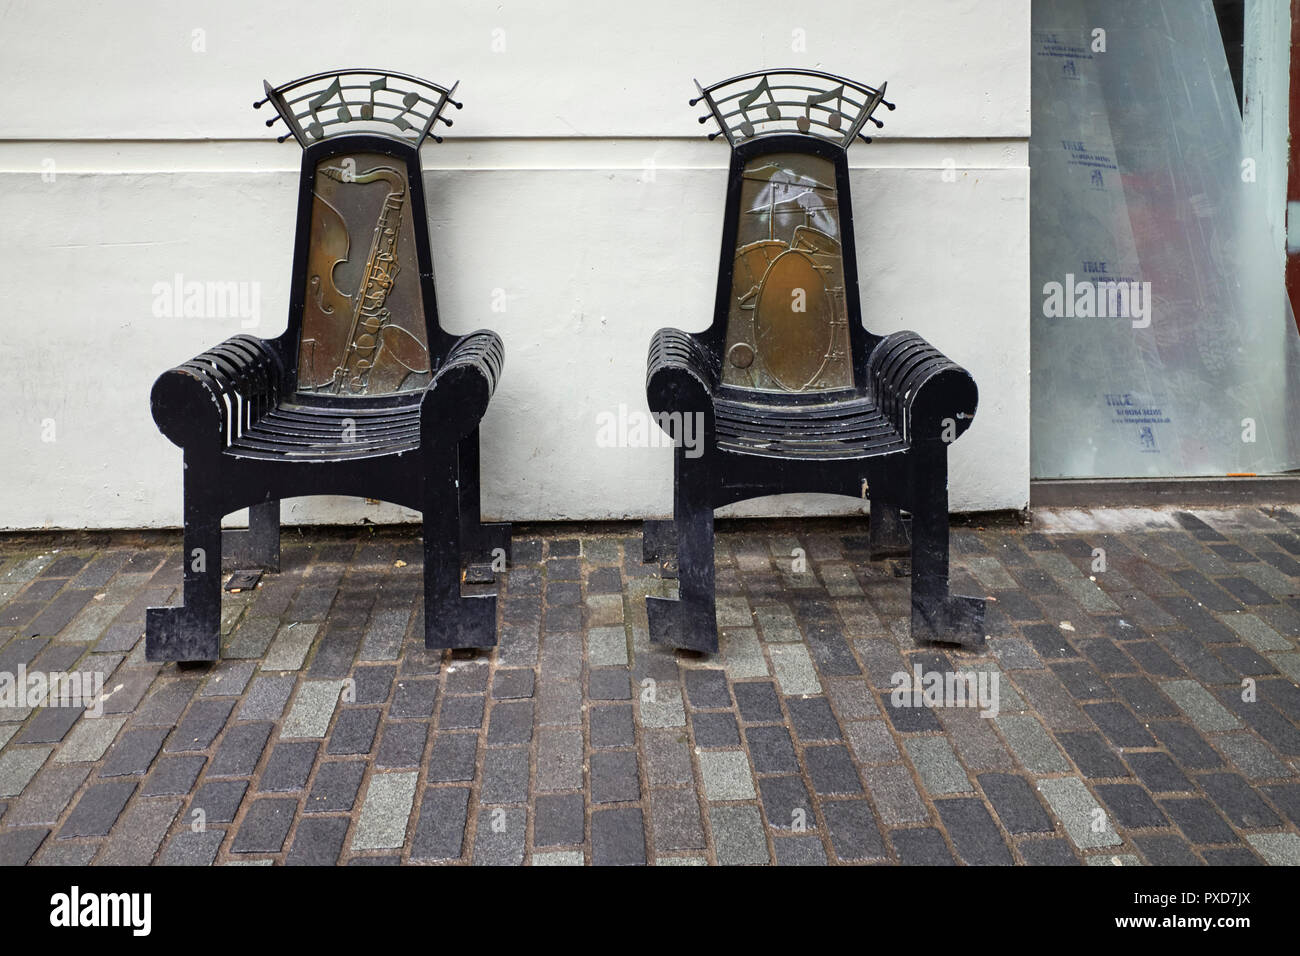 Two musical chairs in a hidden road near Matthew Street, Liverpool Stock Photo